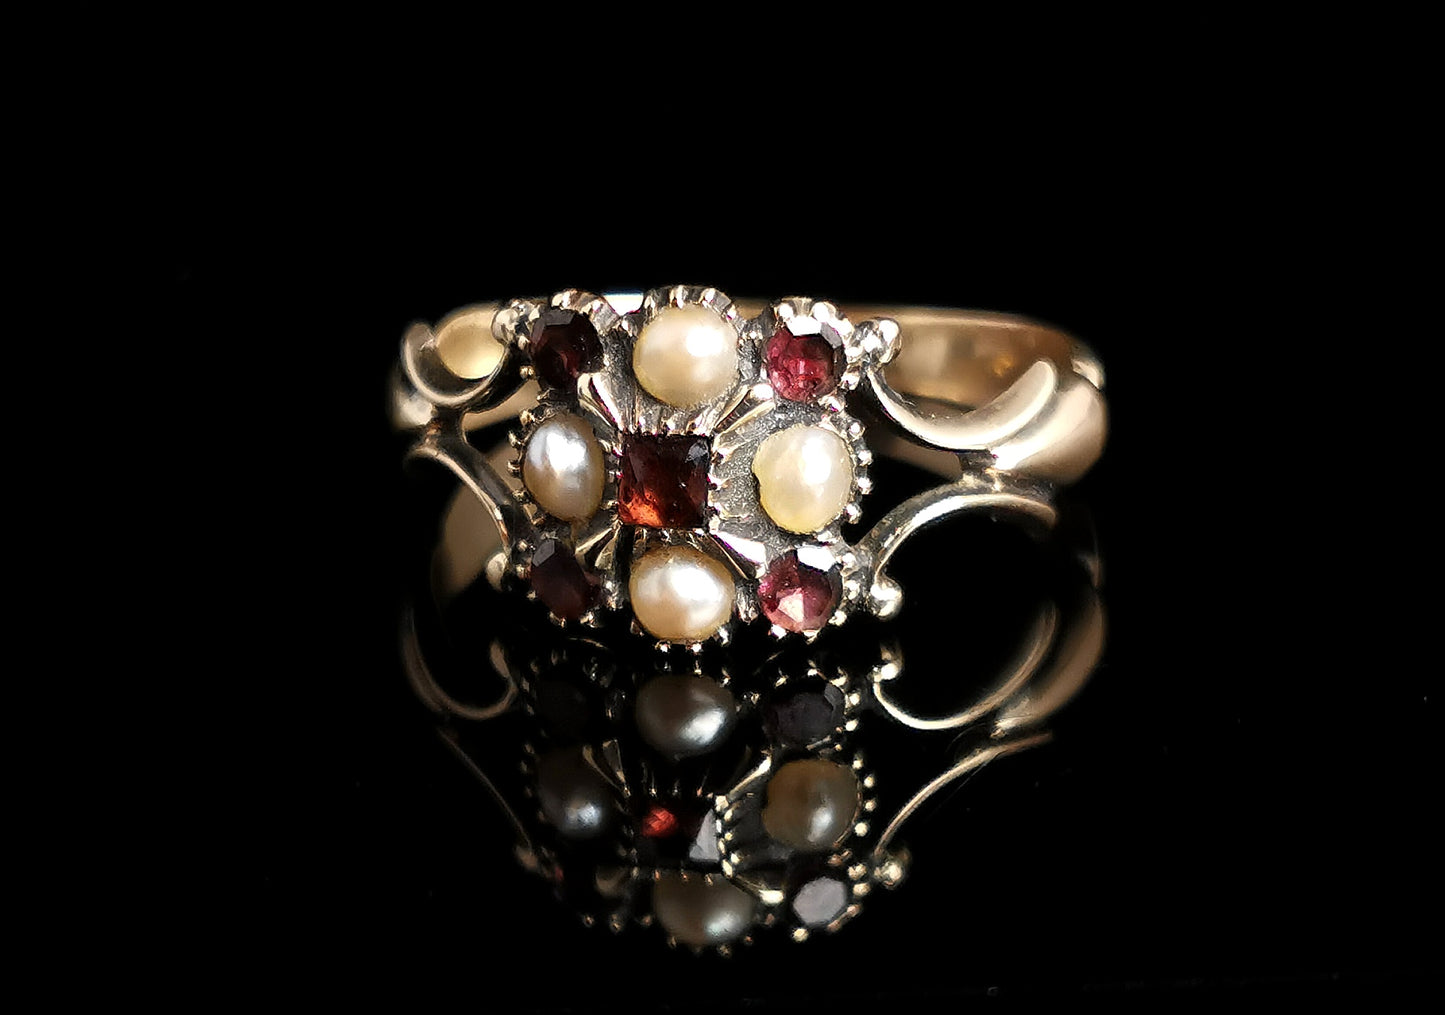 Antique Regency Garnet and seed pearl ring, 9ct yellow gold